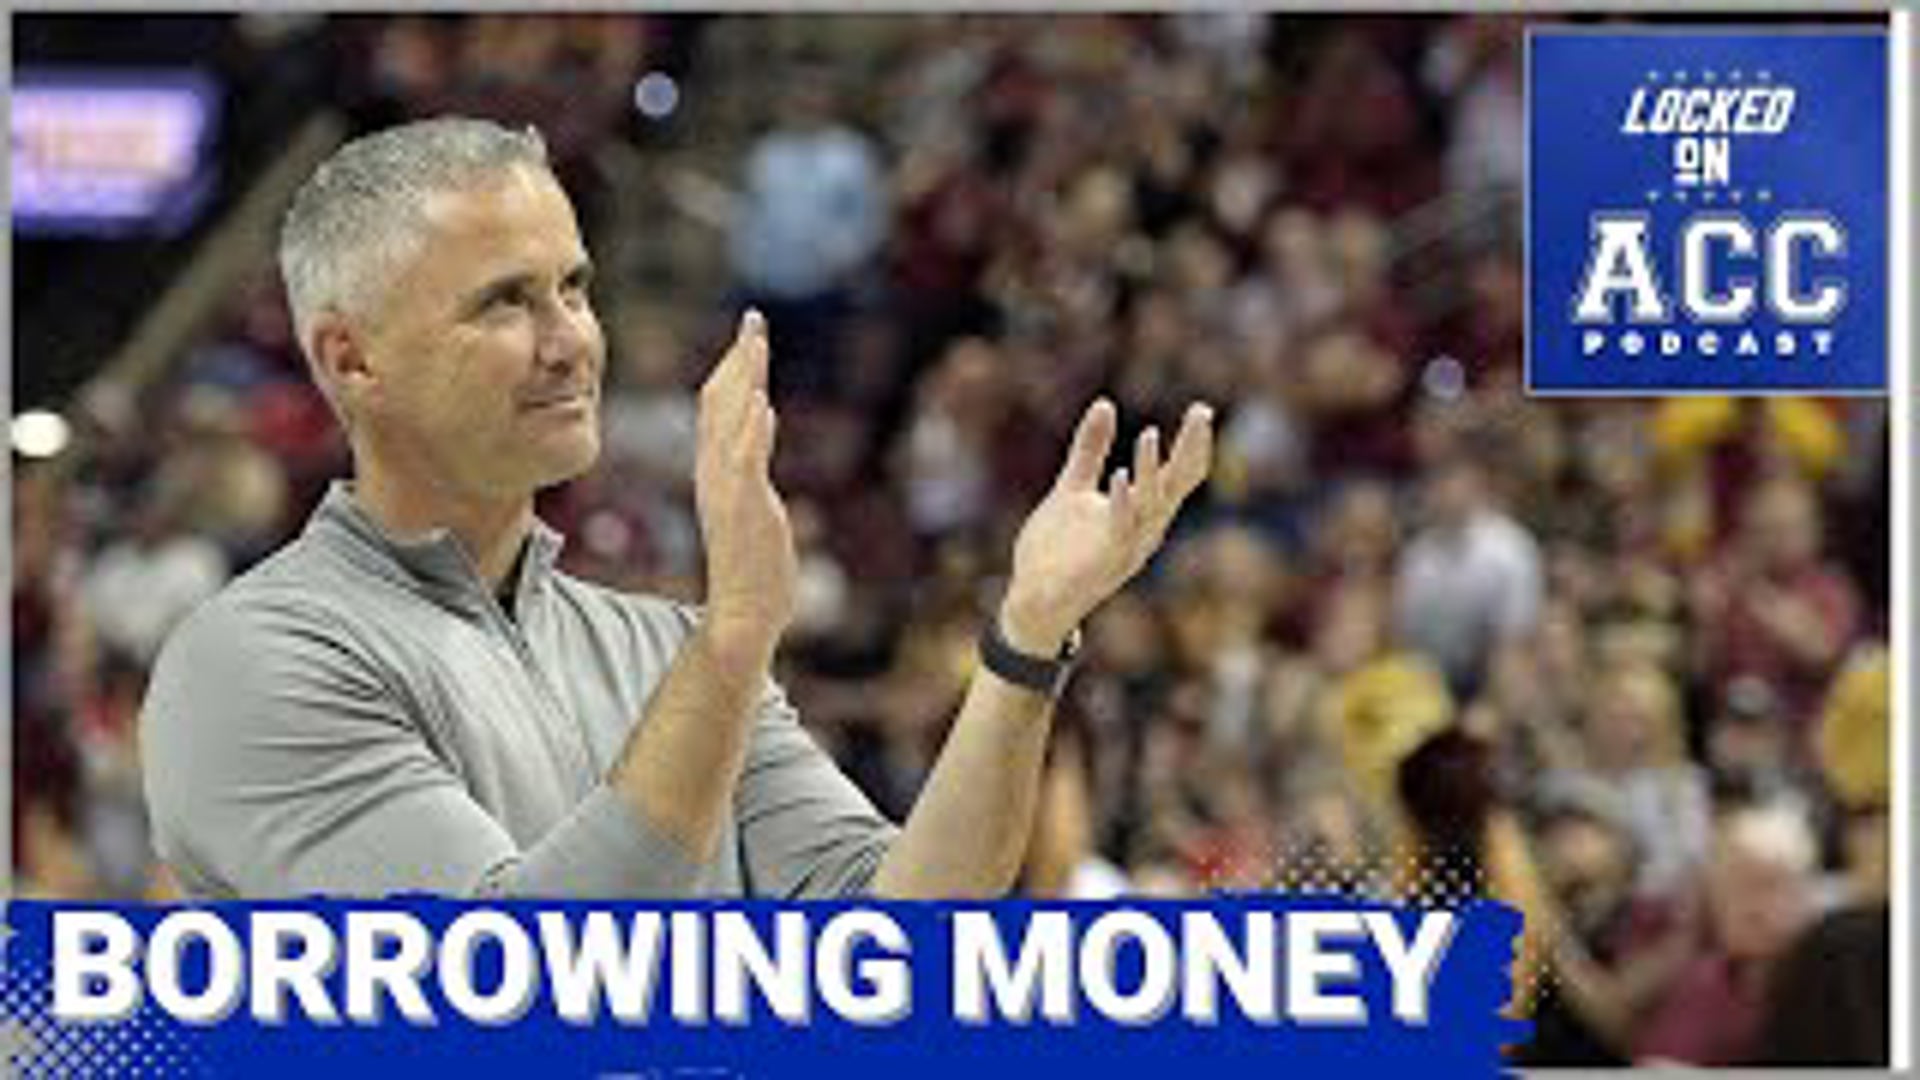 Florida State University is looking to raise nearly $327 million for their football program by offering revenue bonds.